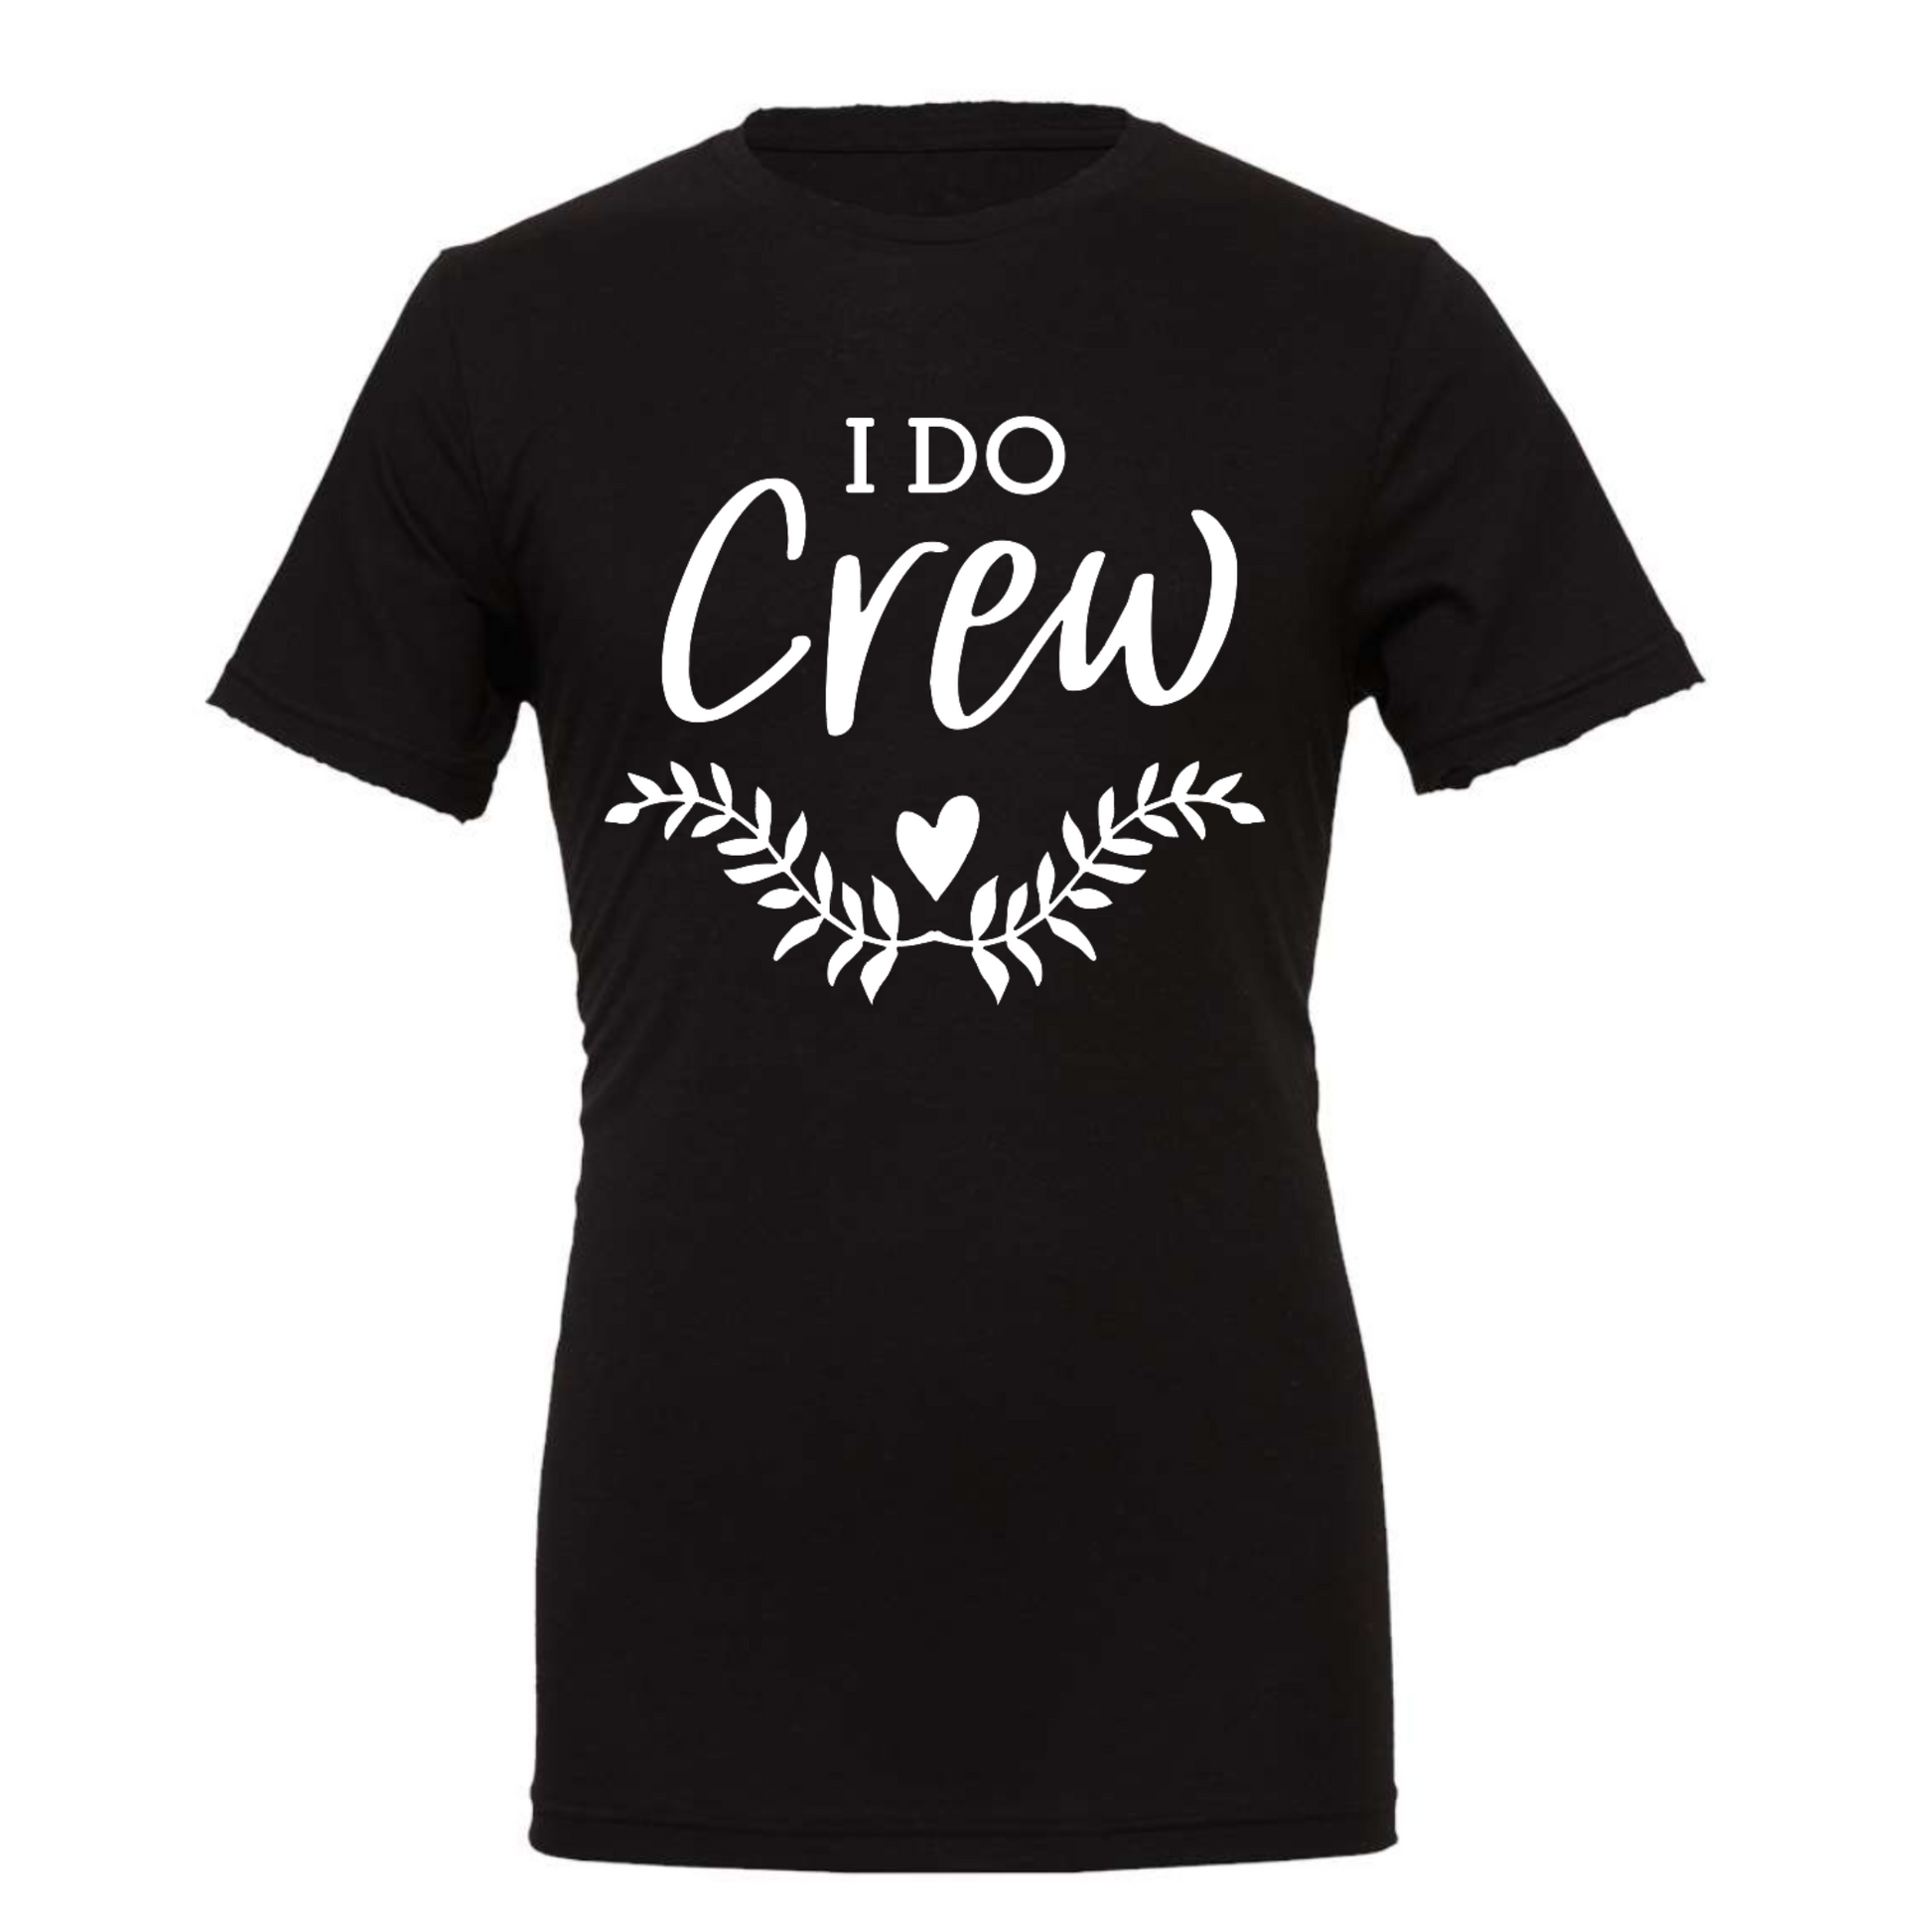 I Do Crew T-shirt I'm black. The front of the shirt has the saying "I do crew" on it with a small leafy garland below it with a heart in the middle. The design is in white. This is the front view of the shirt.